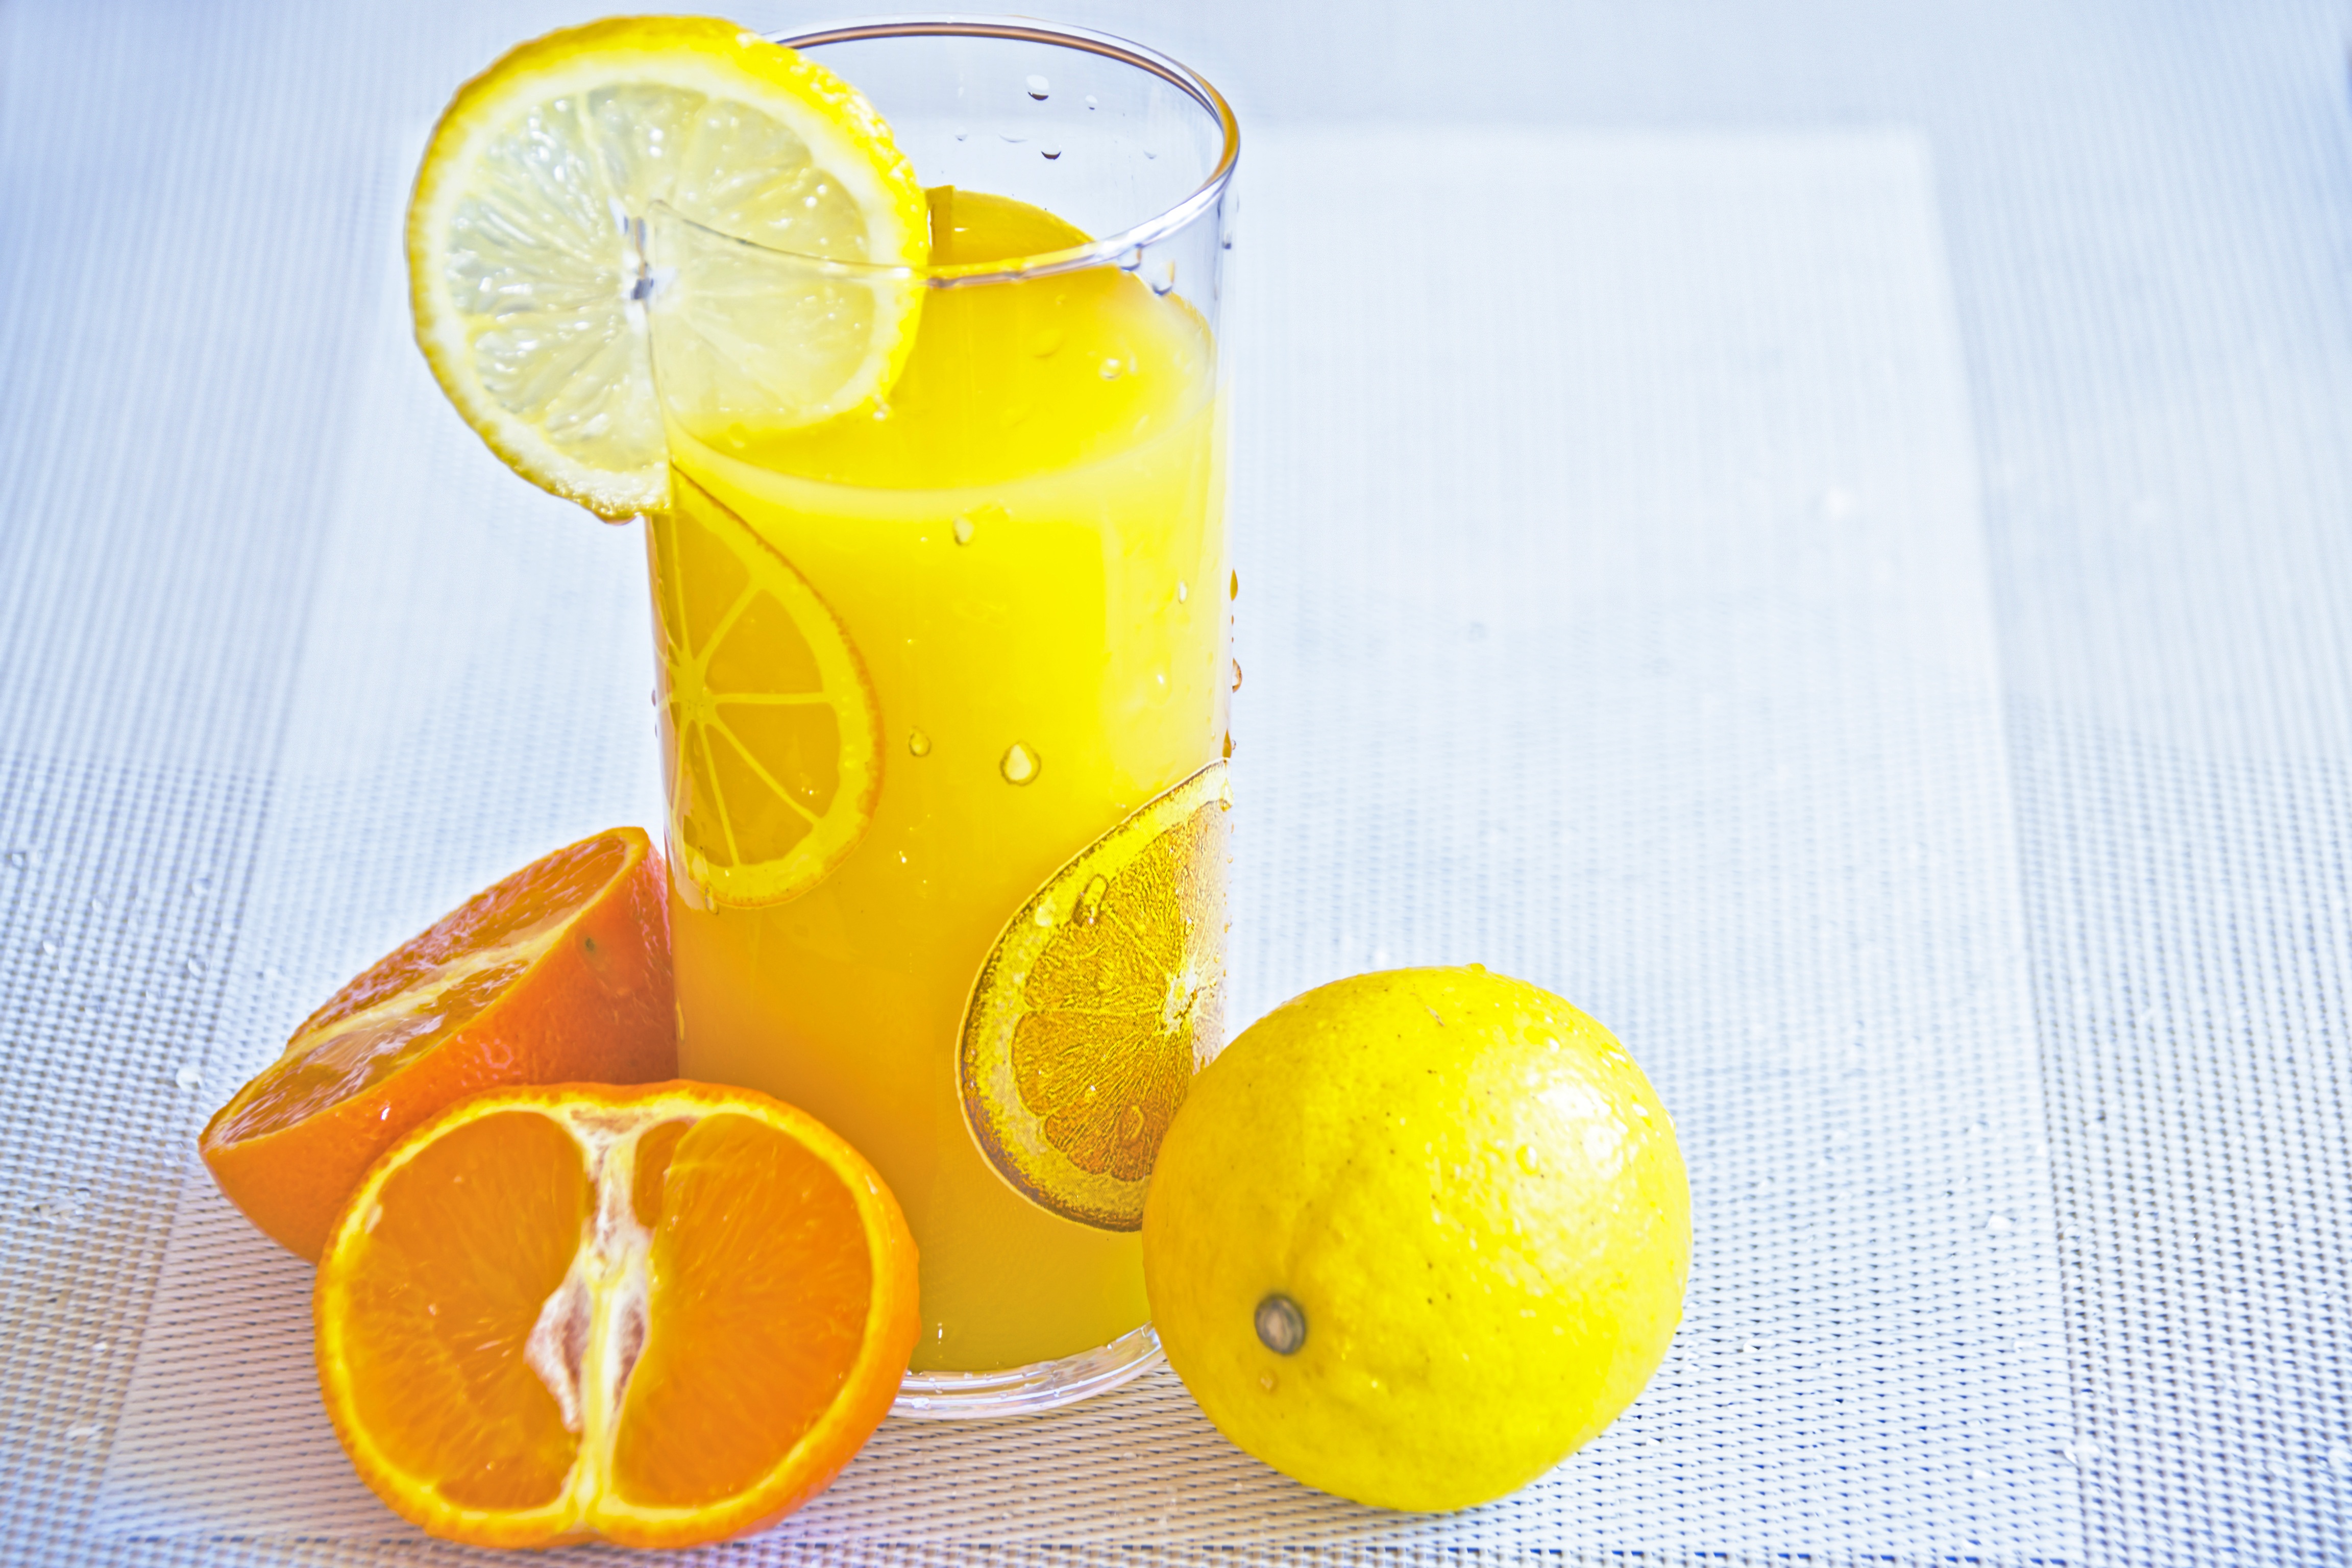 A freshly squeezed glass of orange juice